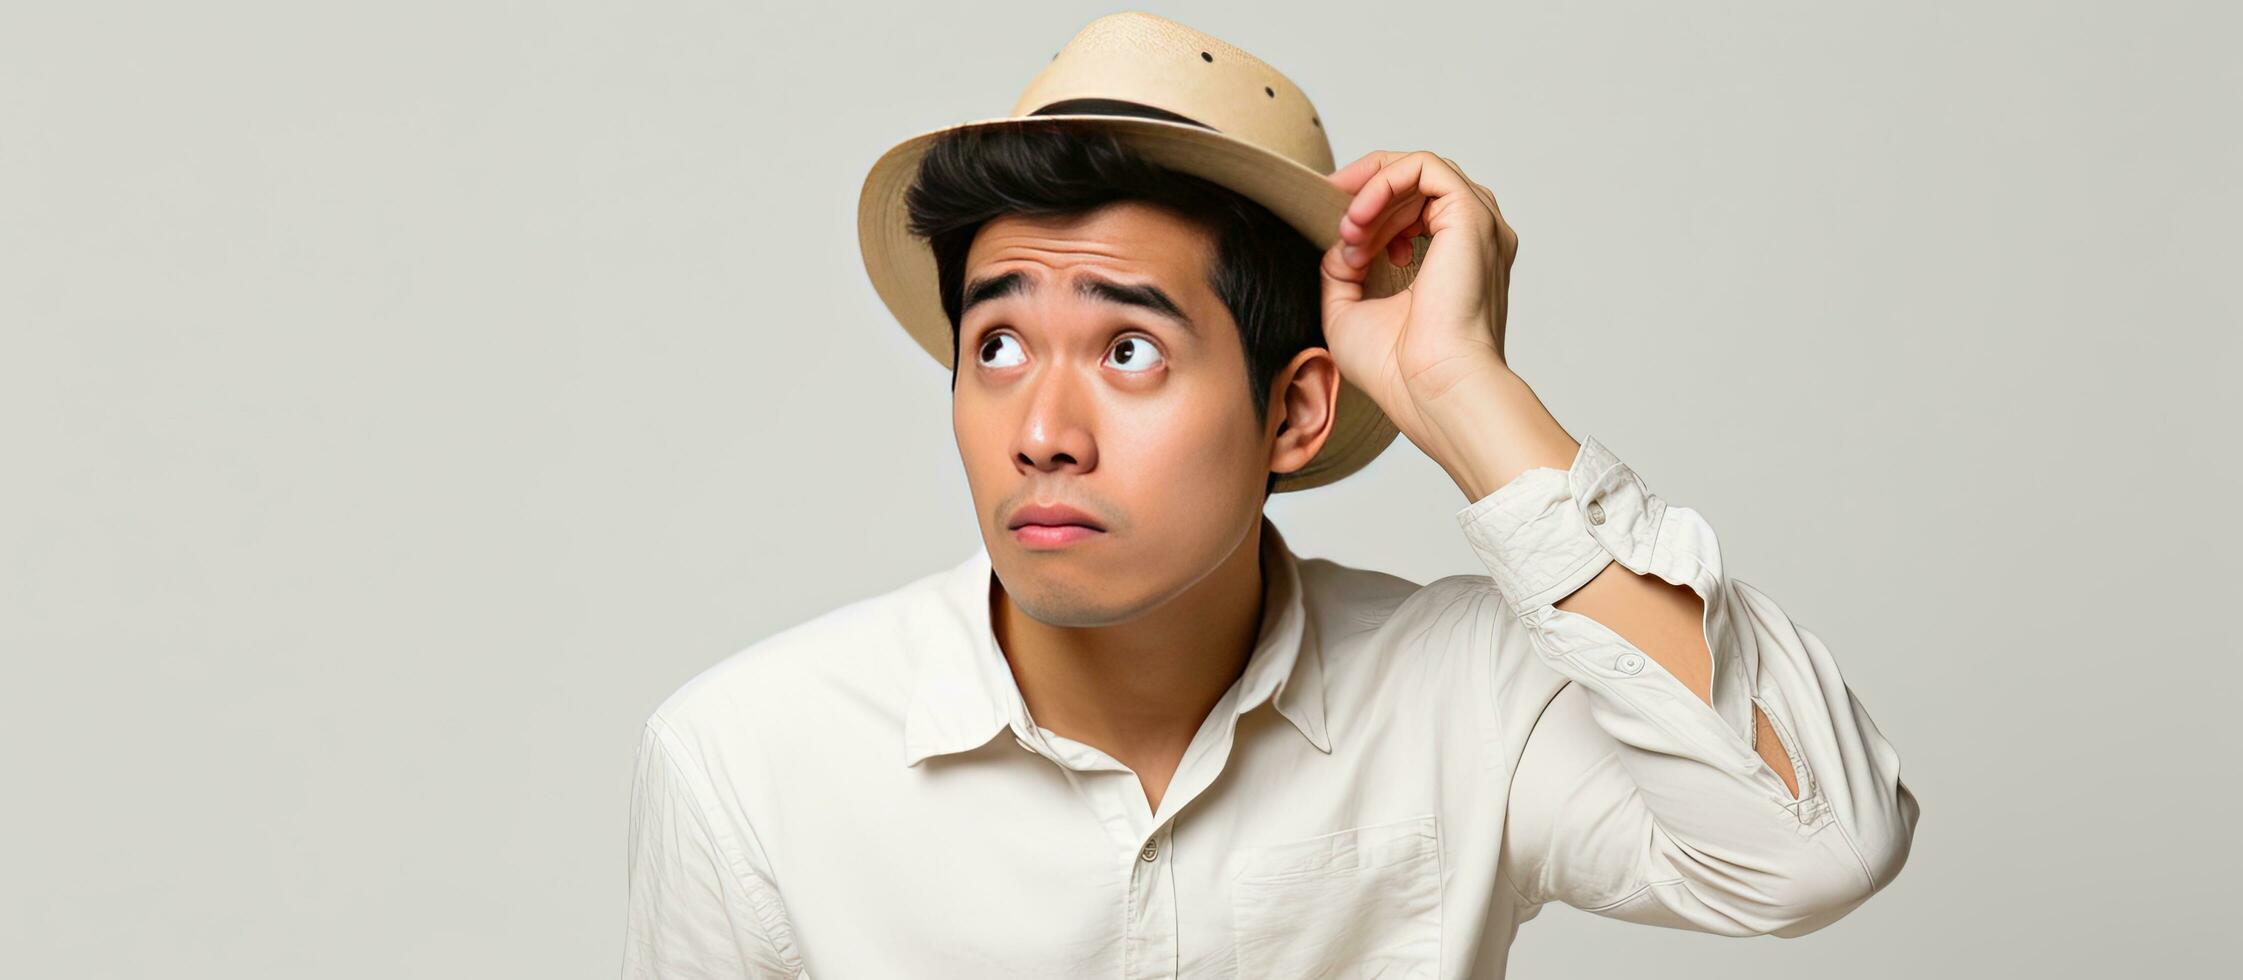 Young Indonesian man wearing a traditional hat looks puzzled and examines empty space white background photo